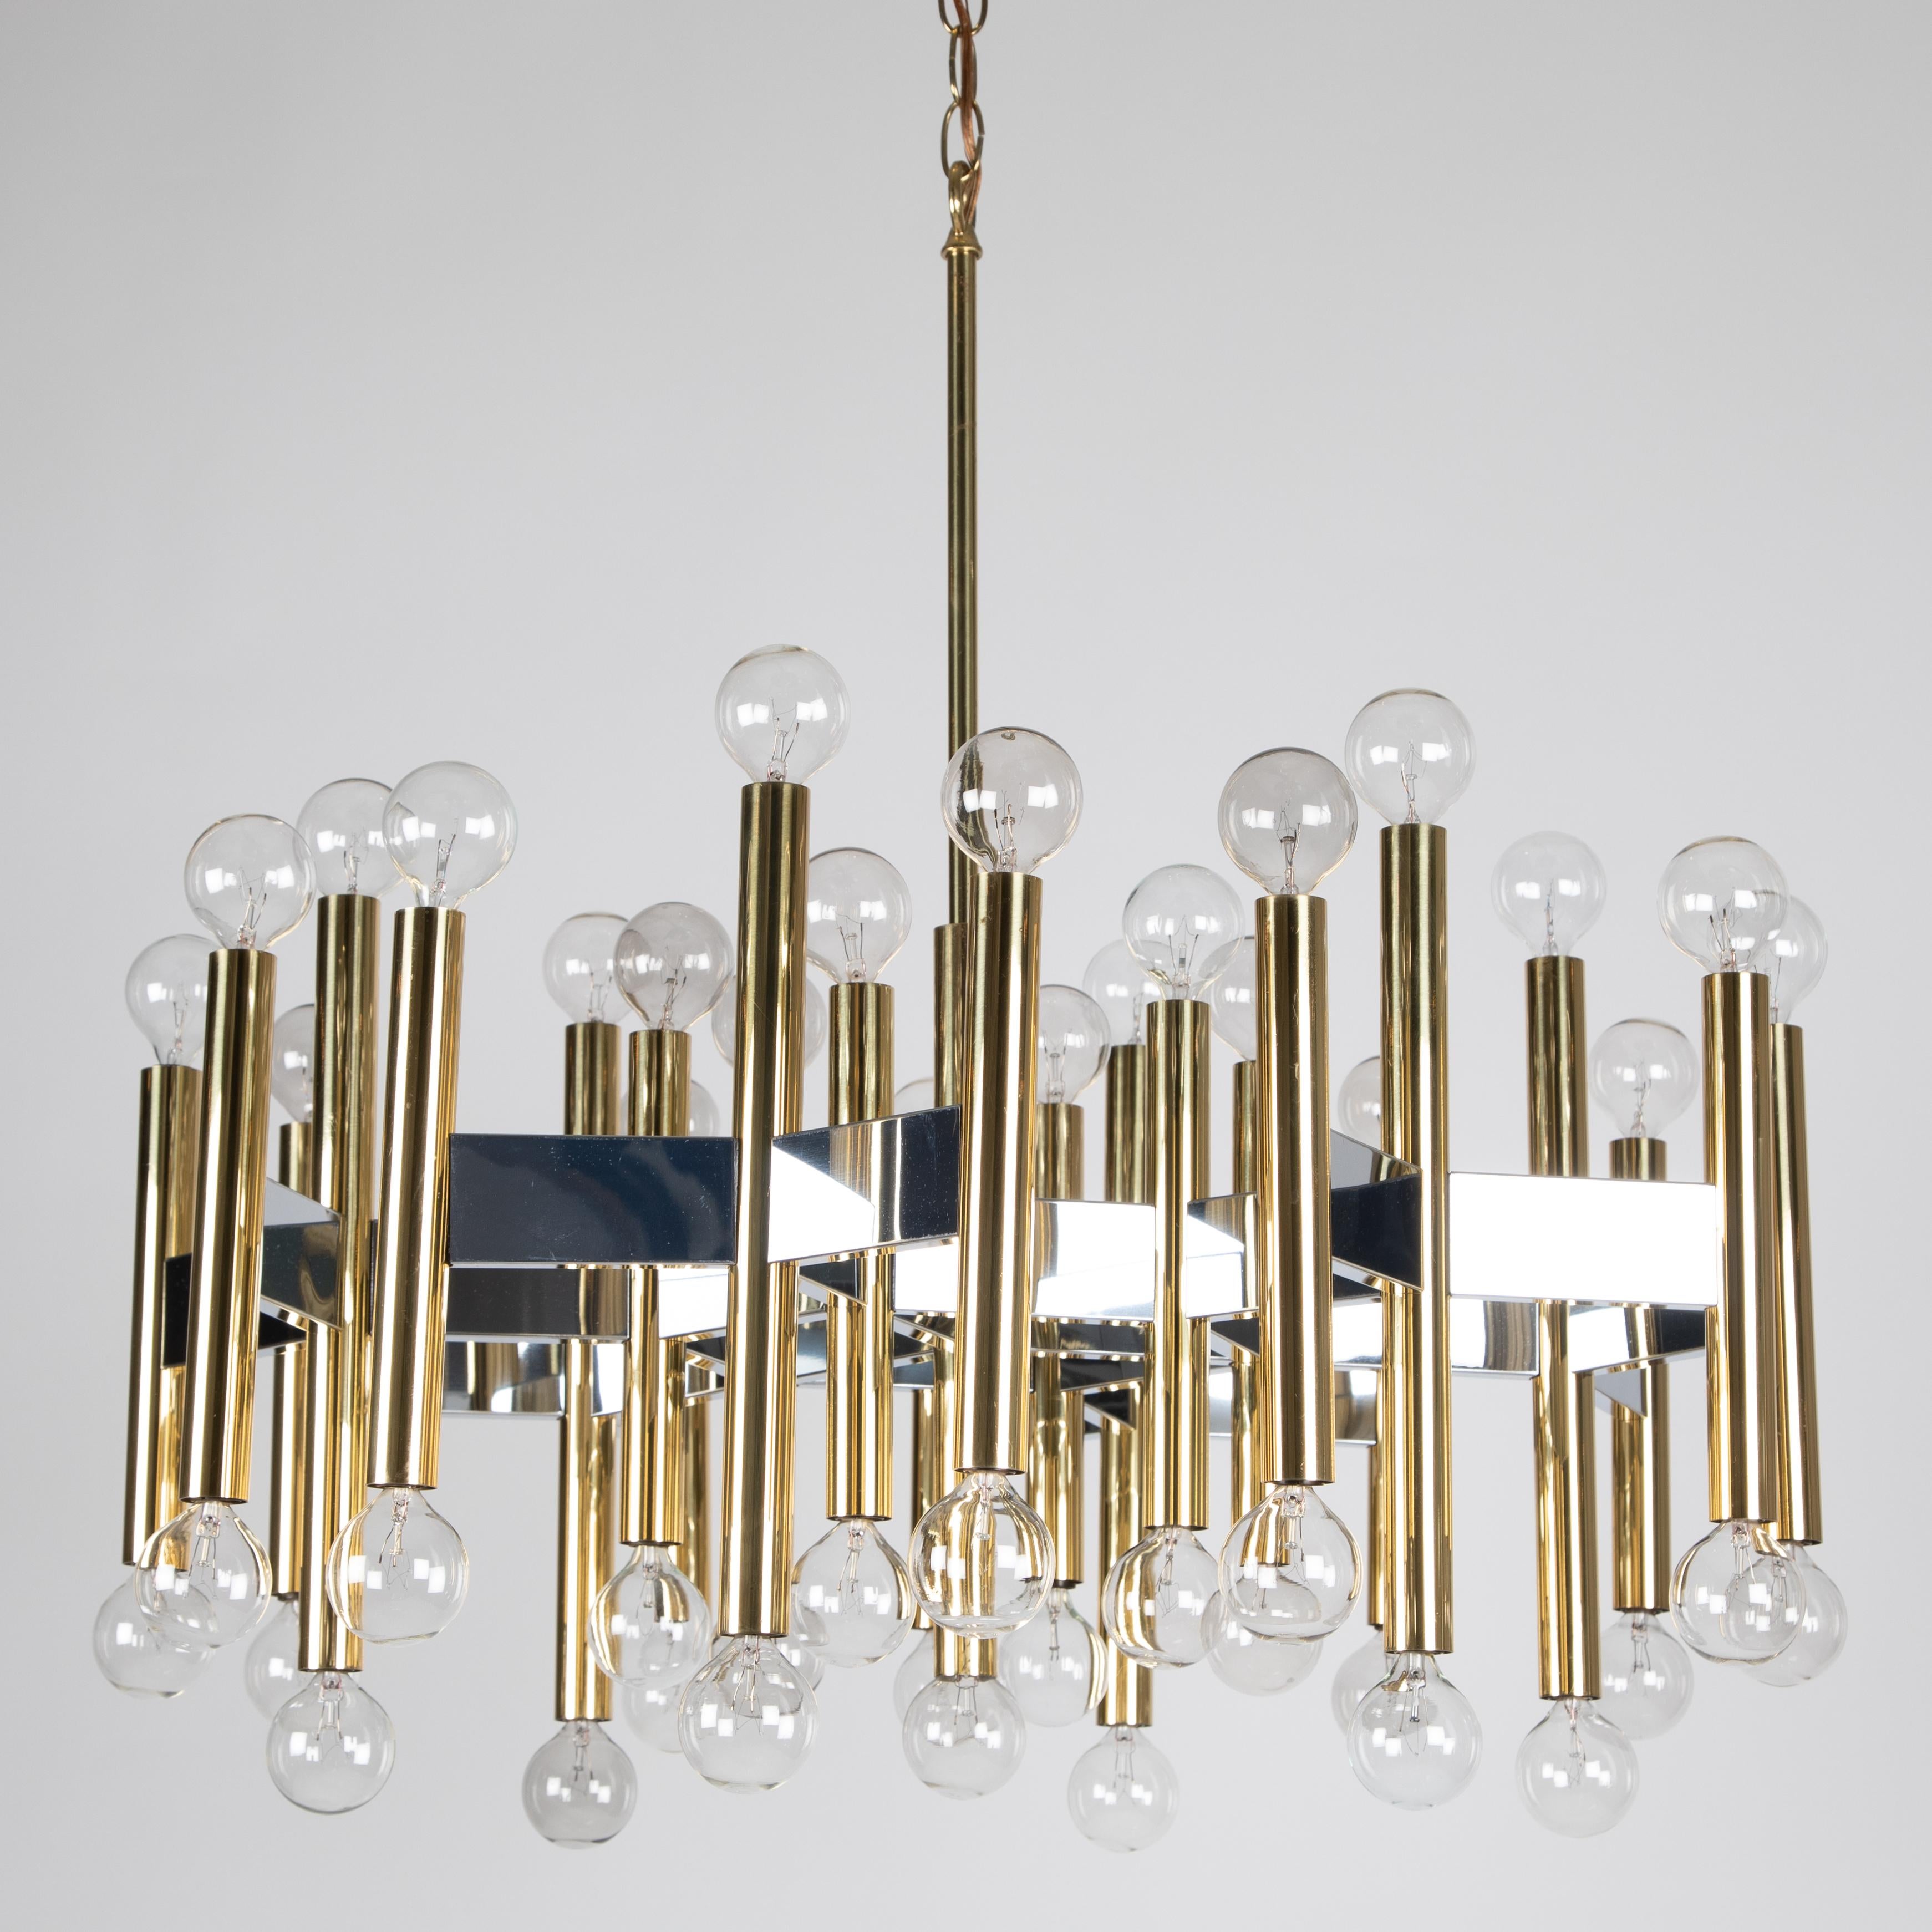 Stunning 1960s brass and chrome geometric chandelier by Gaetano Sciolari with an incredible 49 sockets. Complete with original ceiling canopy.


